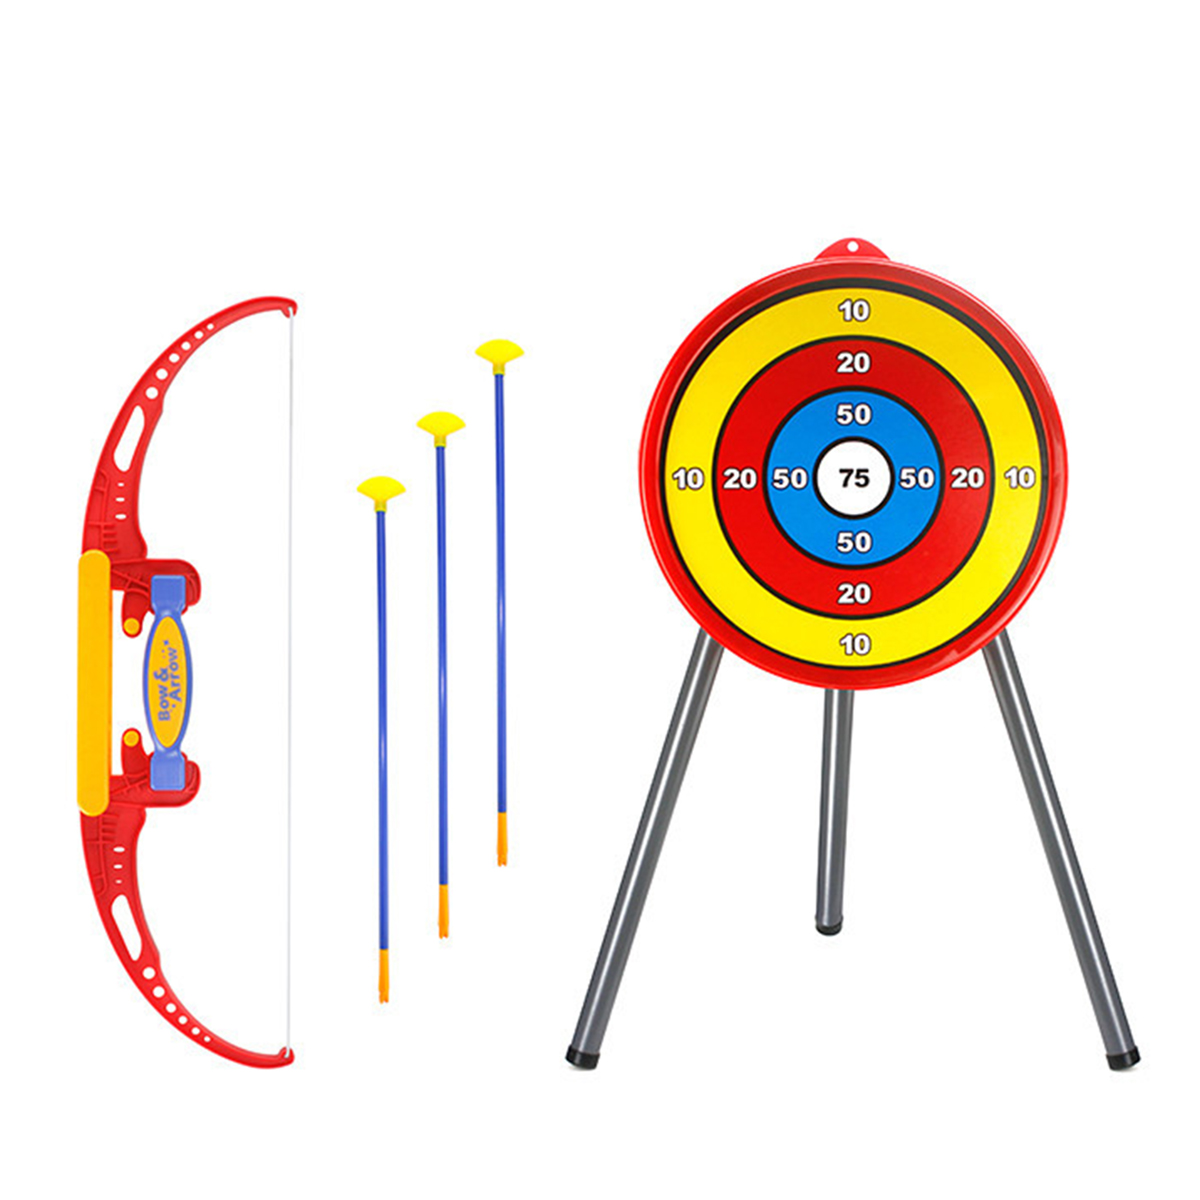 Classic-Archery-Shoot-Game-Set-Develop-Skill-Novelties-Toys-for-Young-Kids-1690766-4